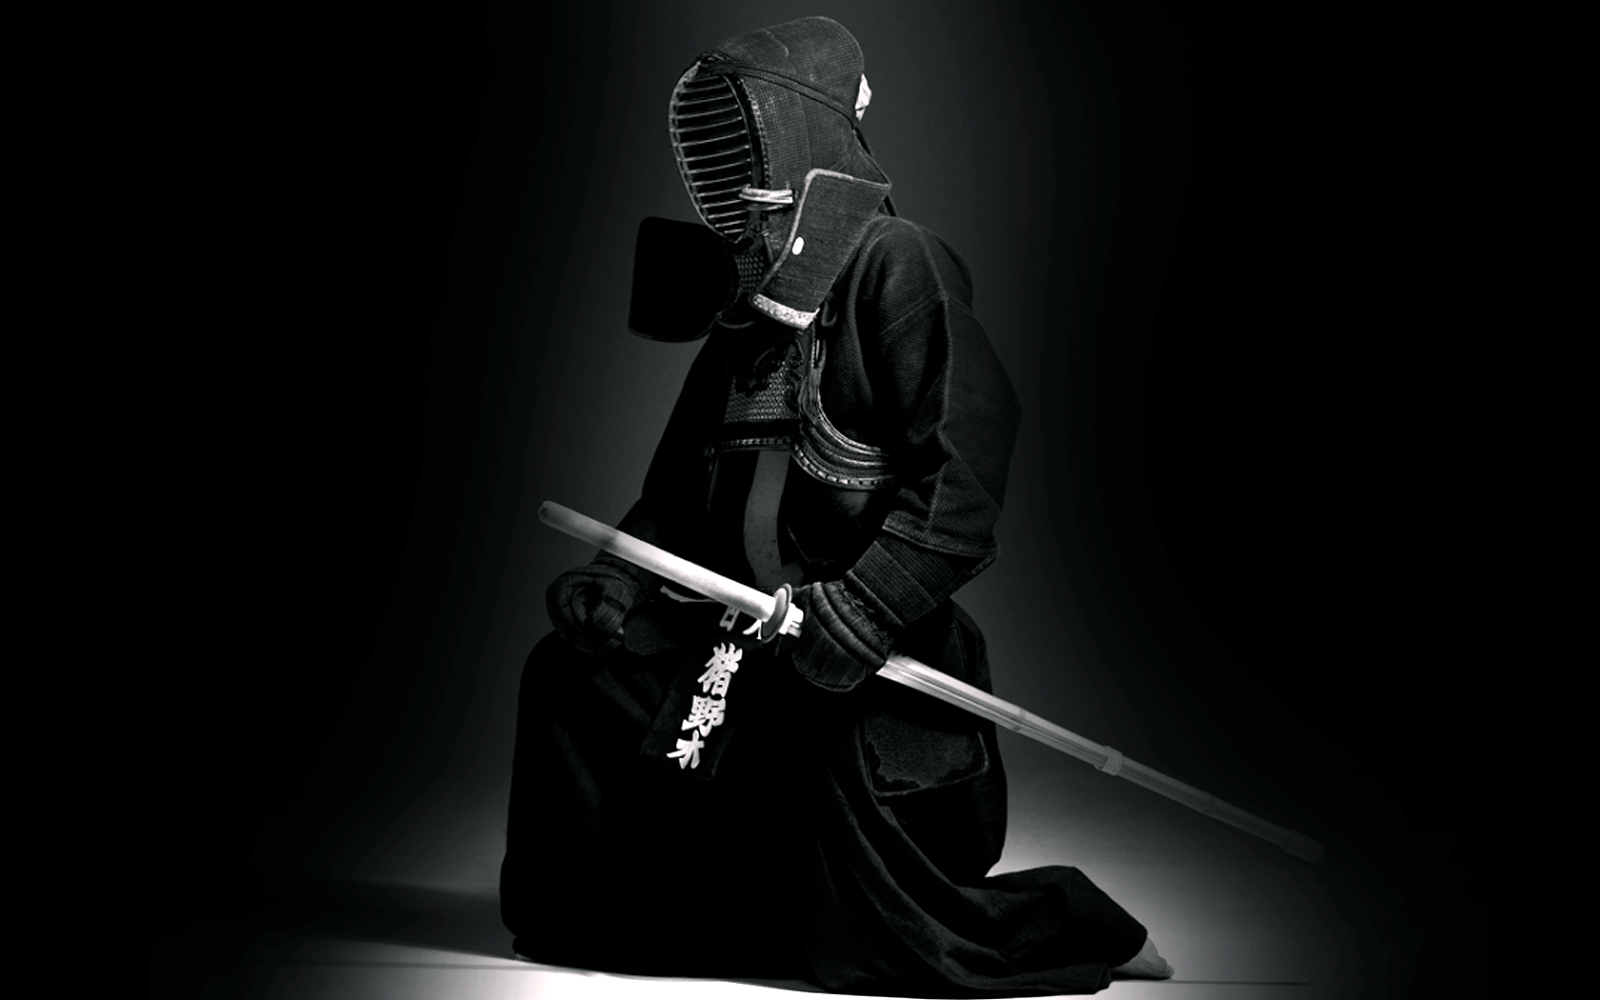 Japanese Wallpaper Kendo Related